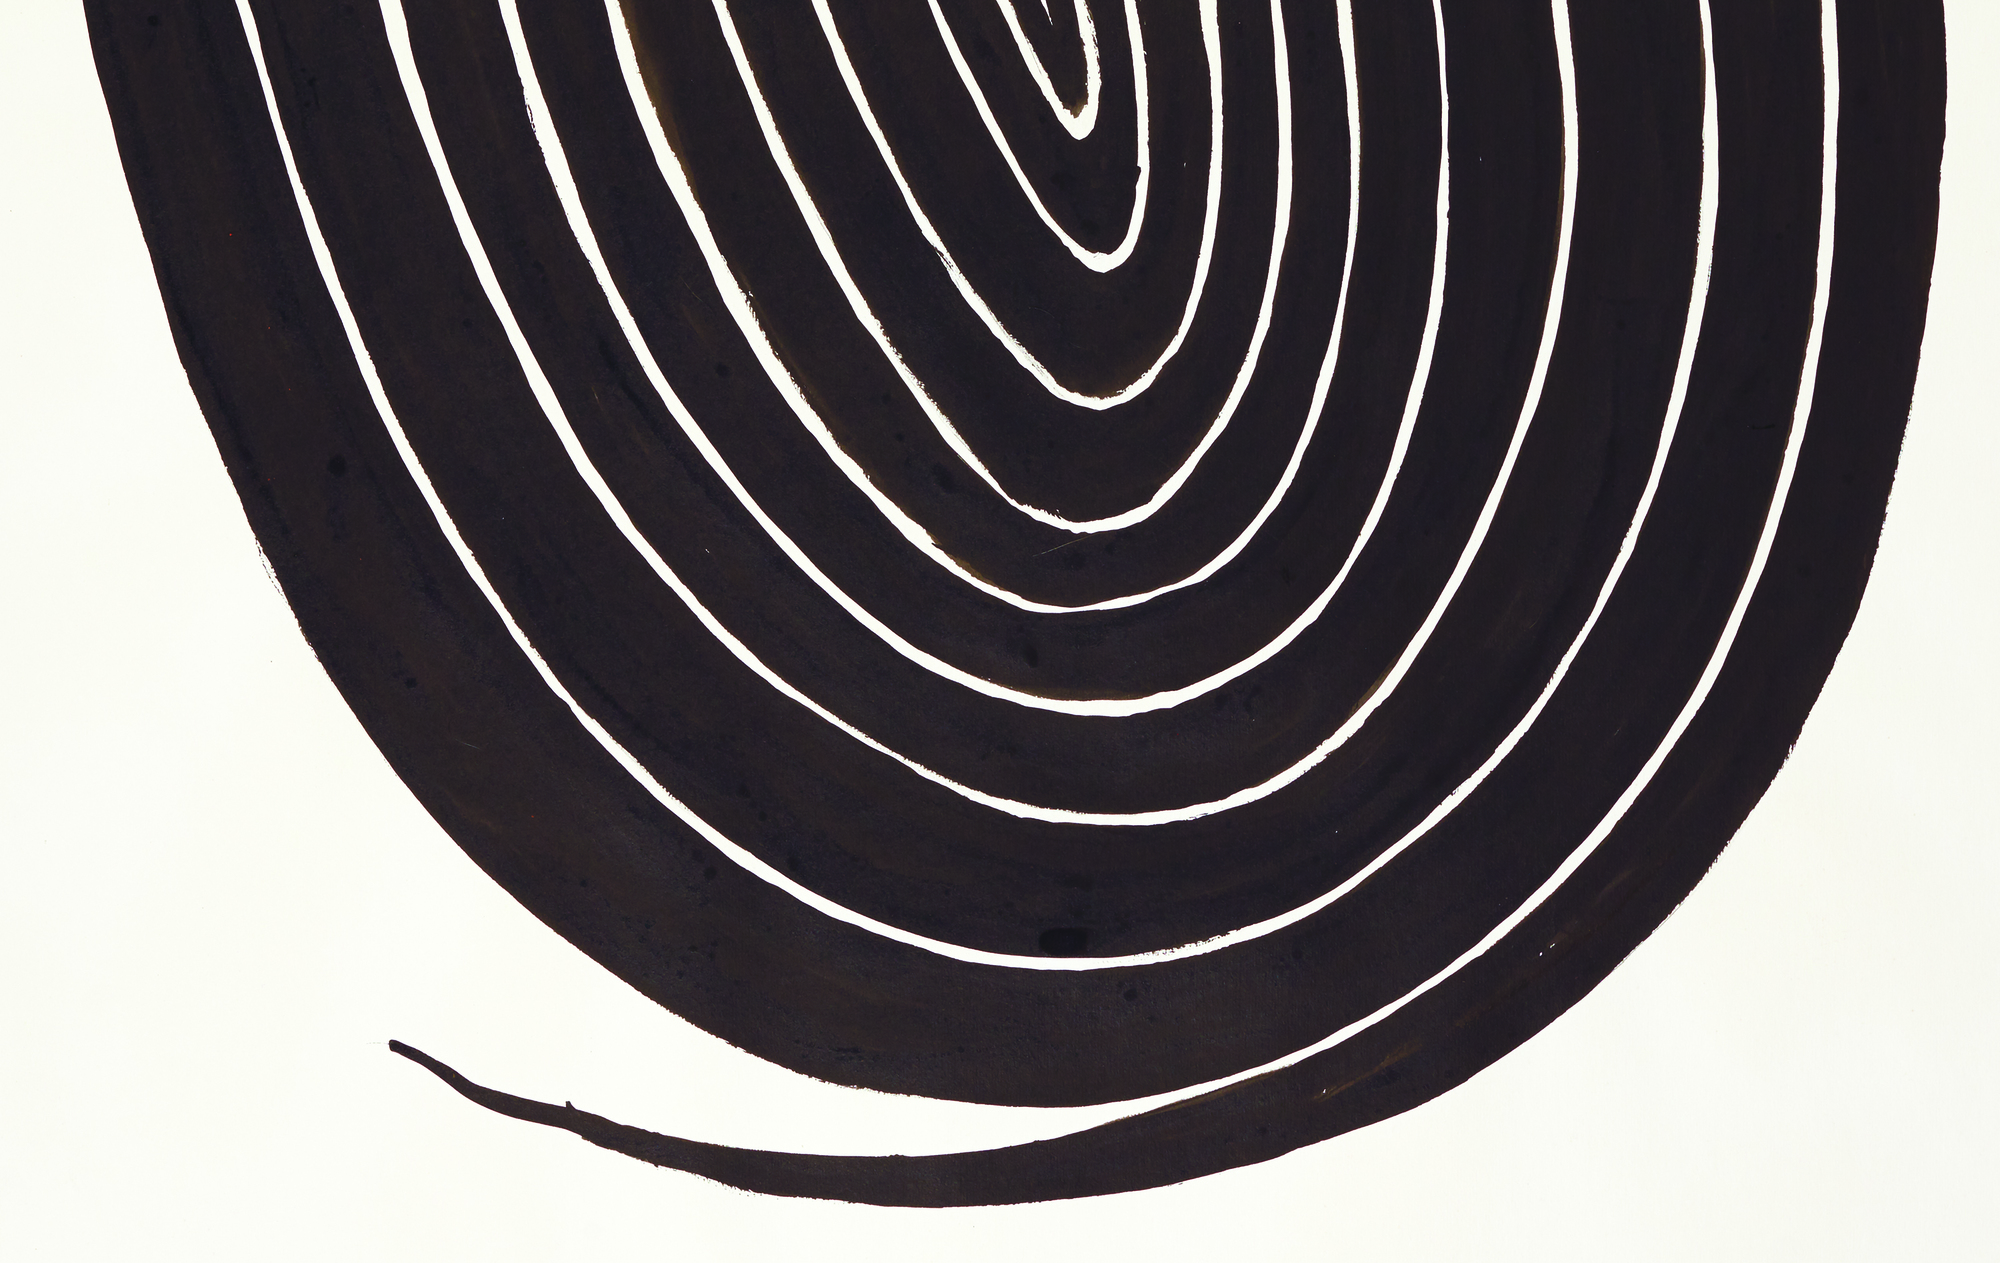 ALEXANDER CALDER - The Oval Spiral - gouache and ink on paper - 43 1/4 x 29 1/2 in.